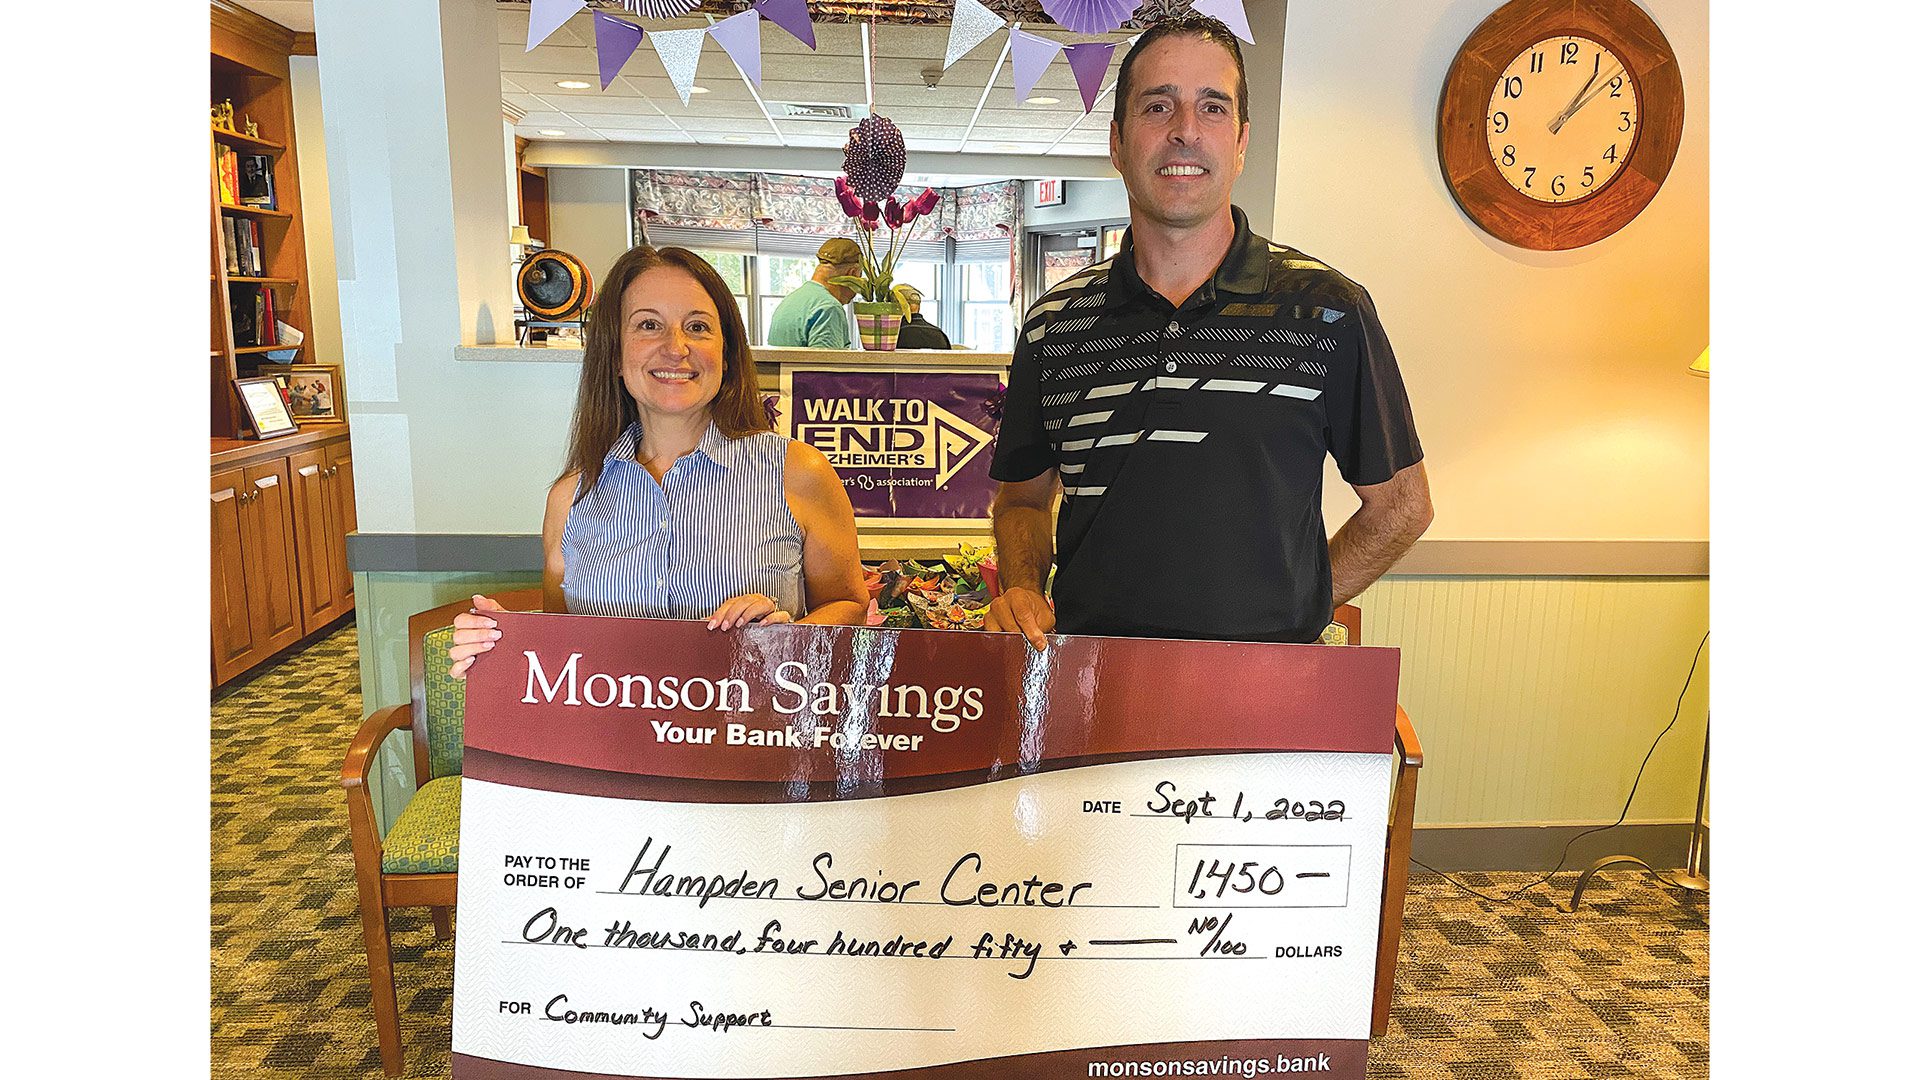 Pictured: Adriano dos Santos (right), Monson Savings Bank’s Hampden branch manager, delivers the $1,450 donation to Wendy Cowles, outreach coordinator for the Hampden Senior Center.